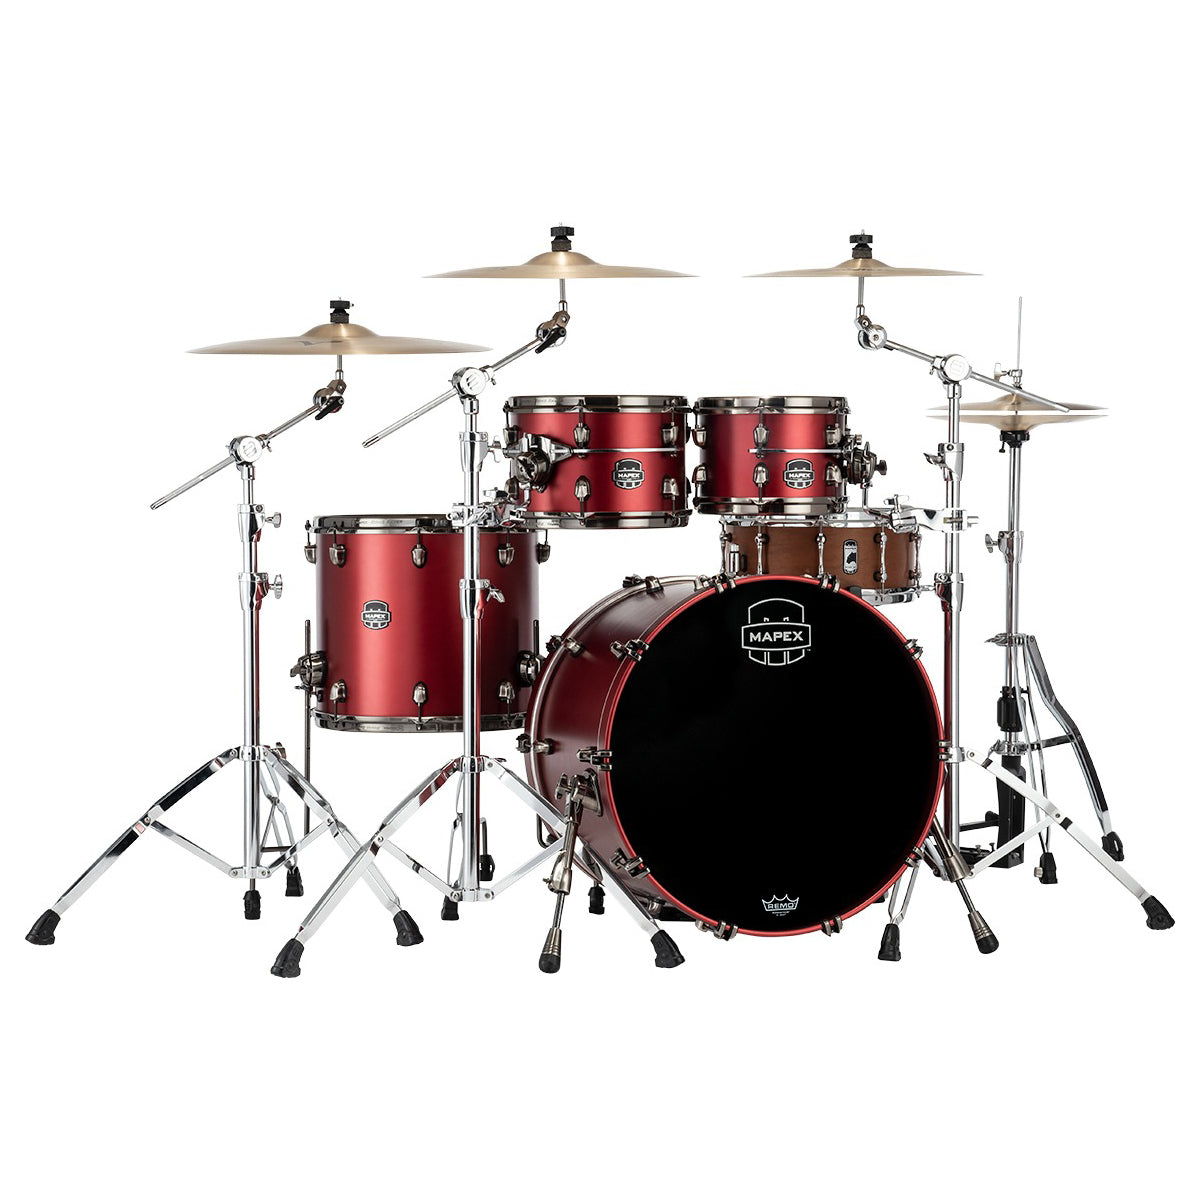 Trống Cơ Mapex SE529XEB Saturn Evolution Classic Birch 4-Piece Shell Pack